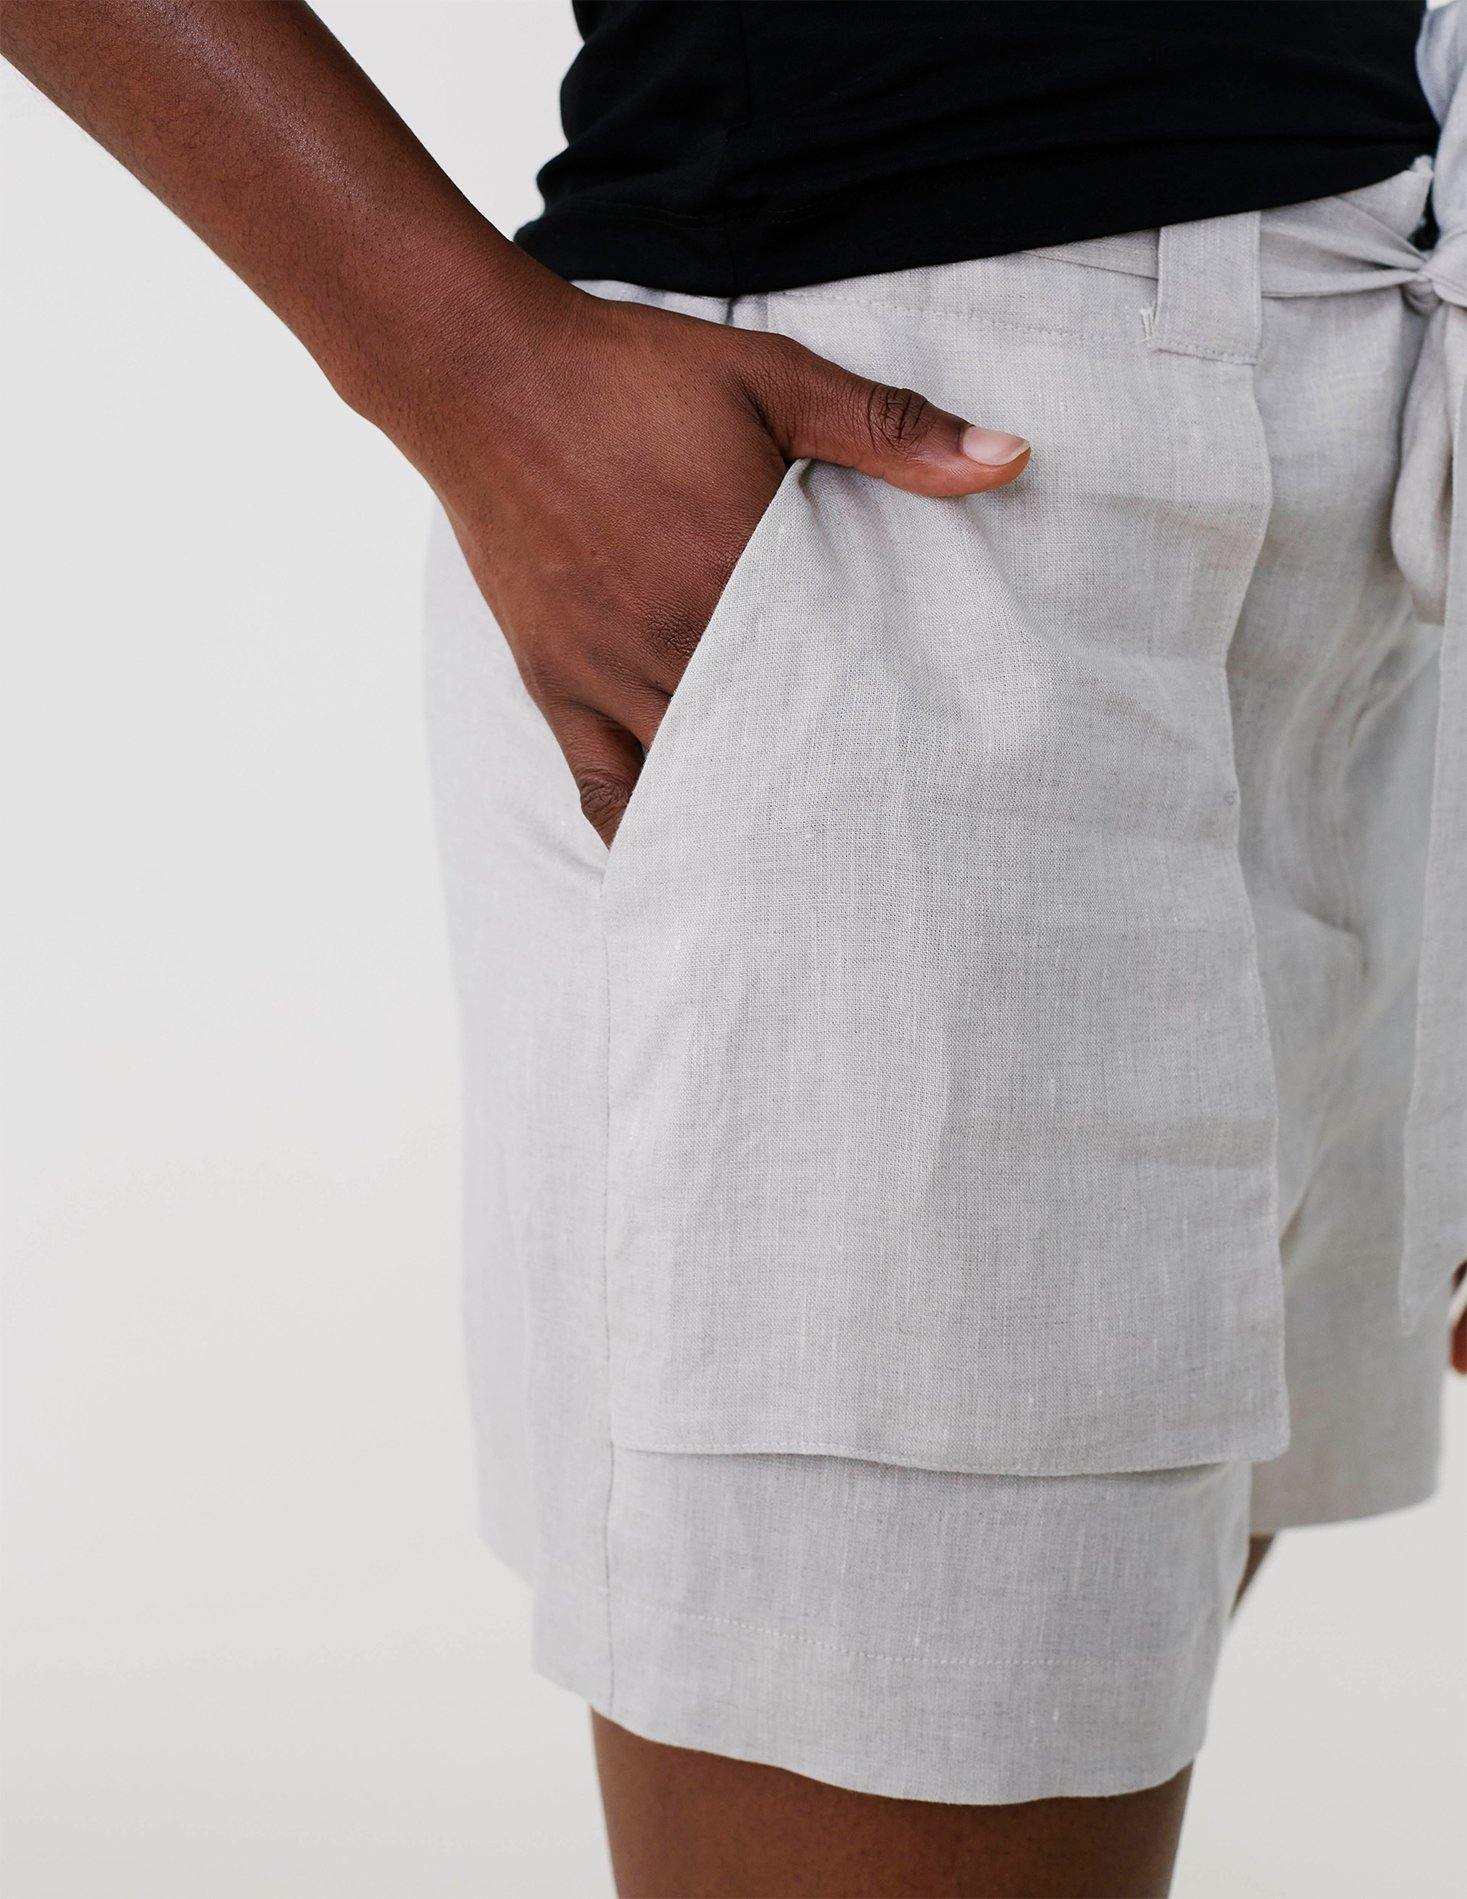 100 percent linen shorts. Deep pockets with tie